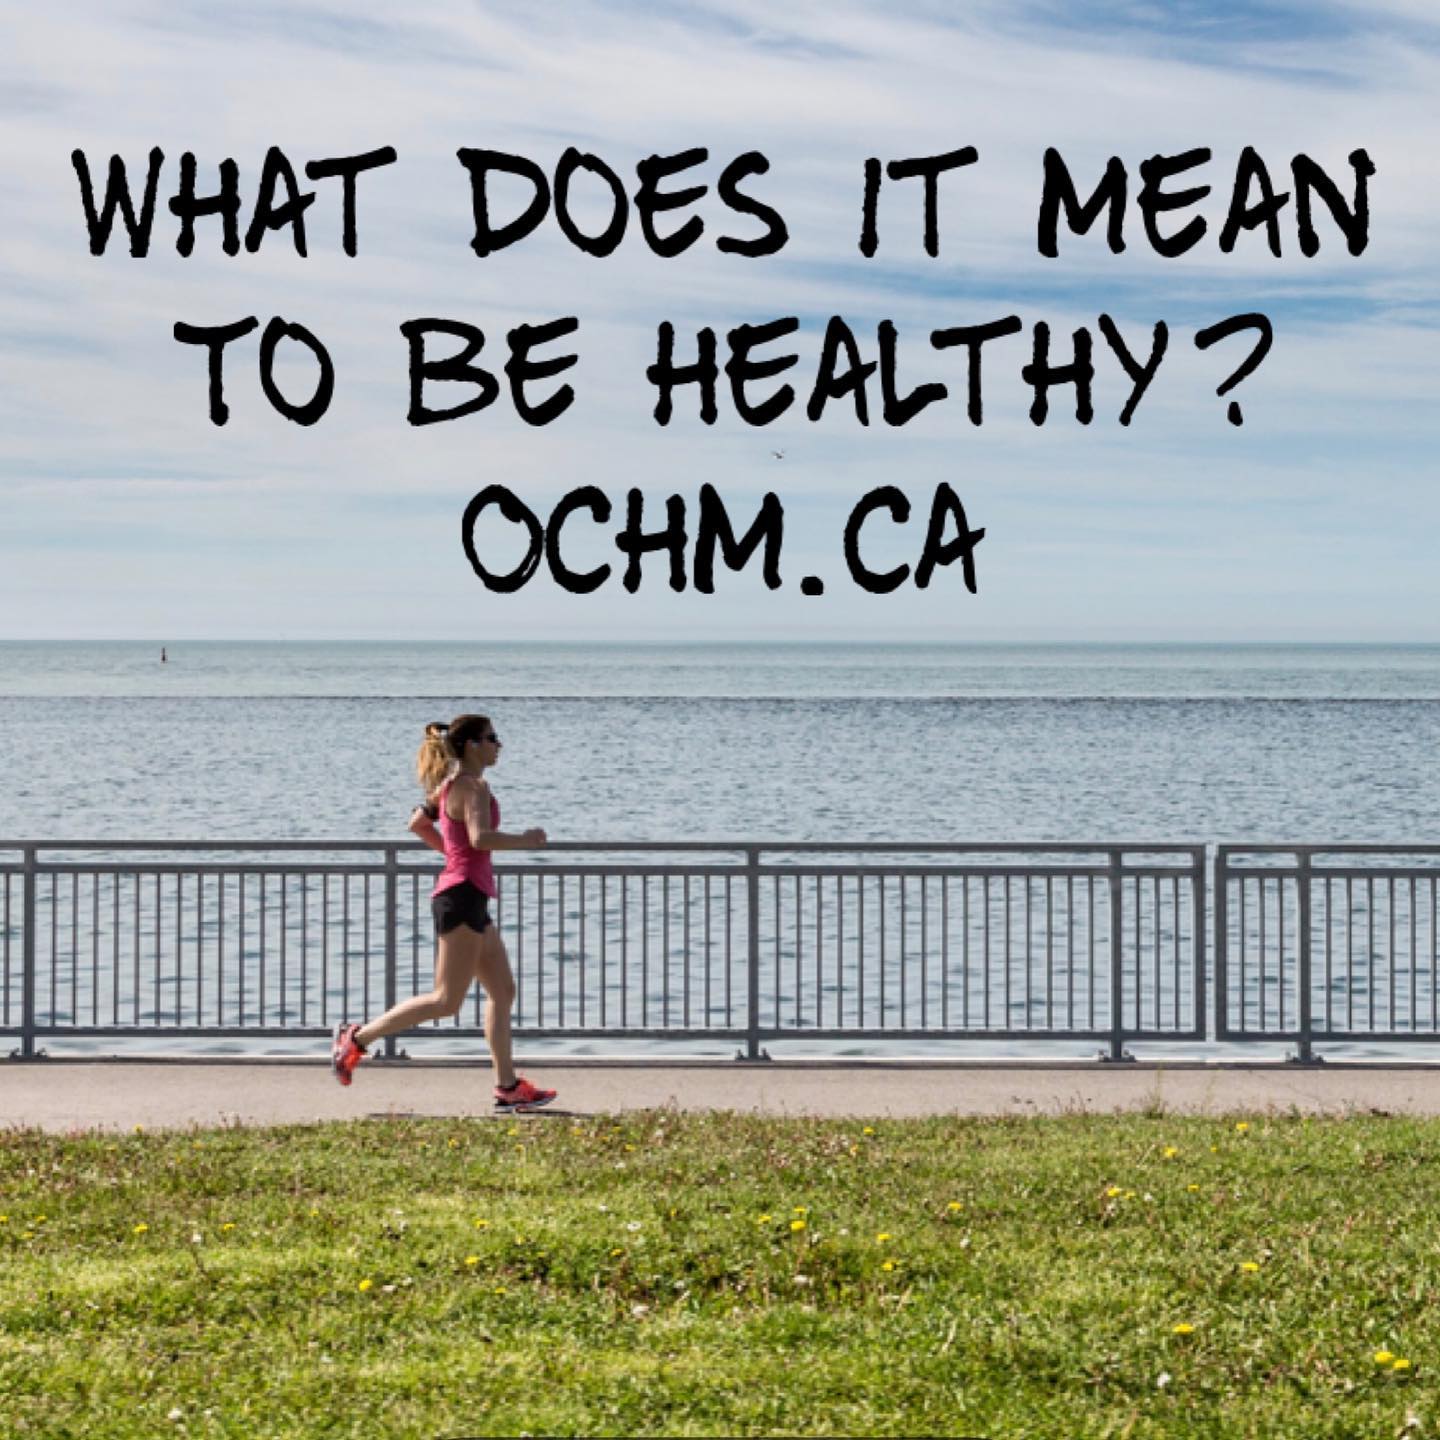 What Does It Mean To Be Healthy?